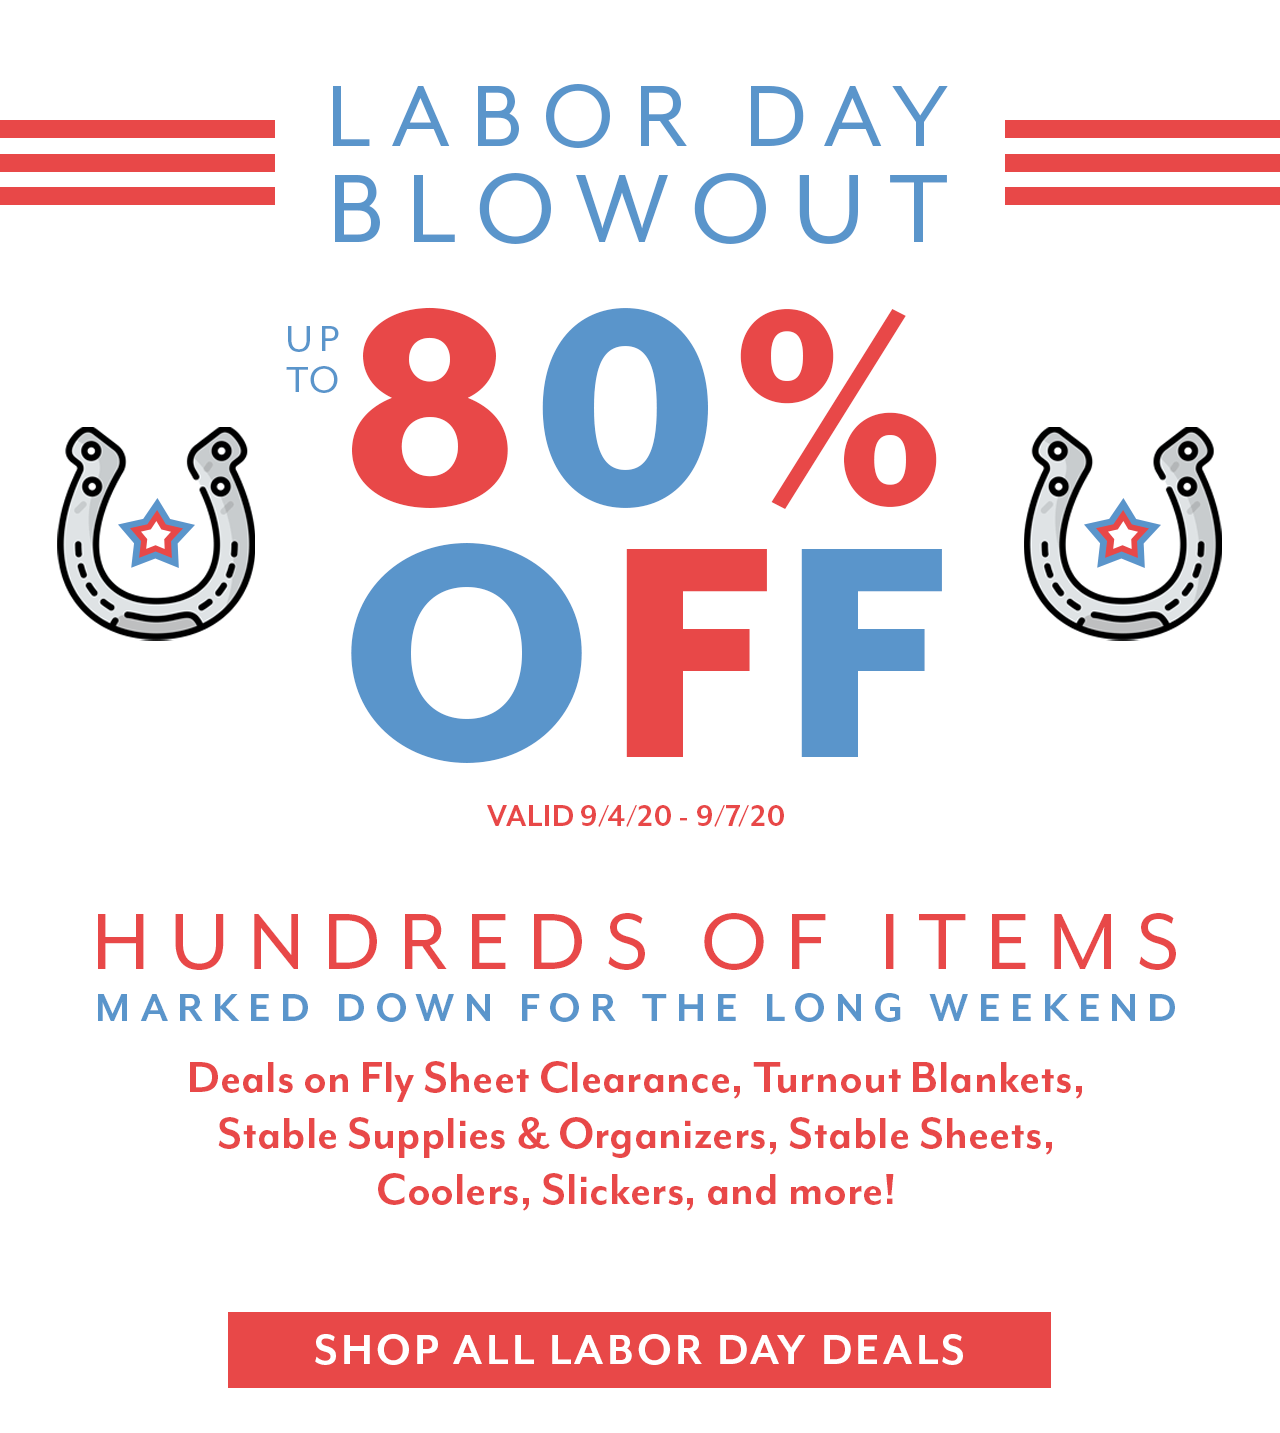 Labor Day Blowout: up to 80% off, this weekend only. 